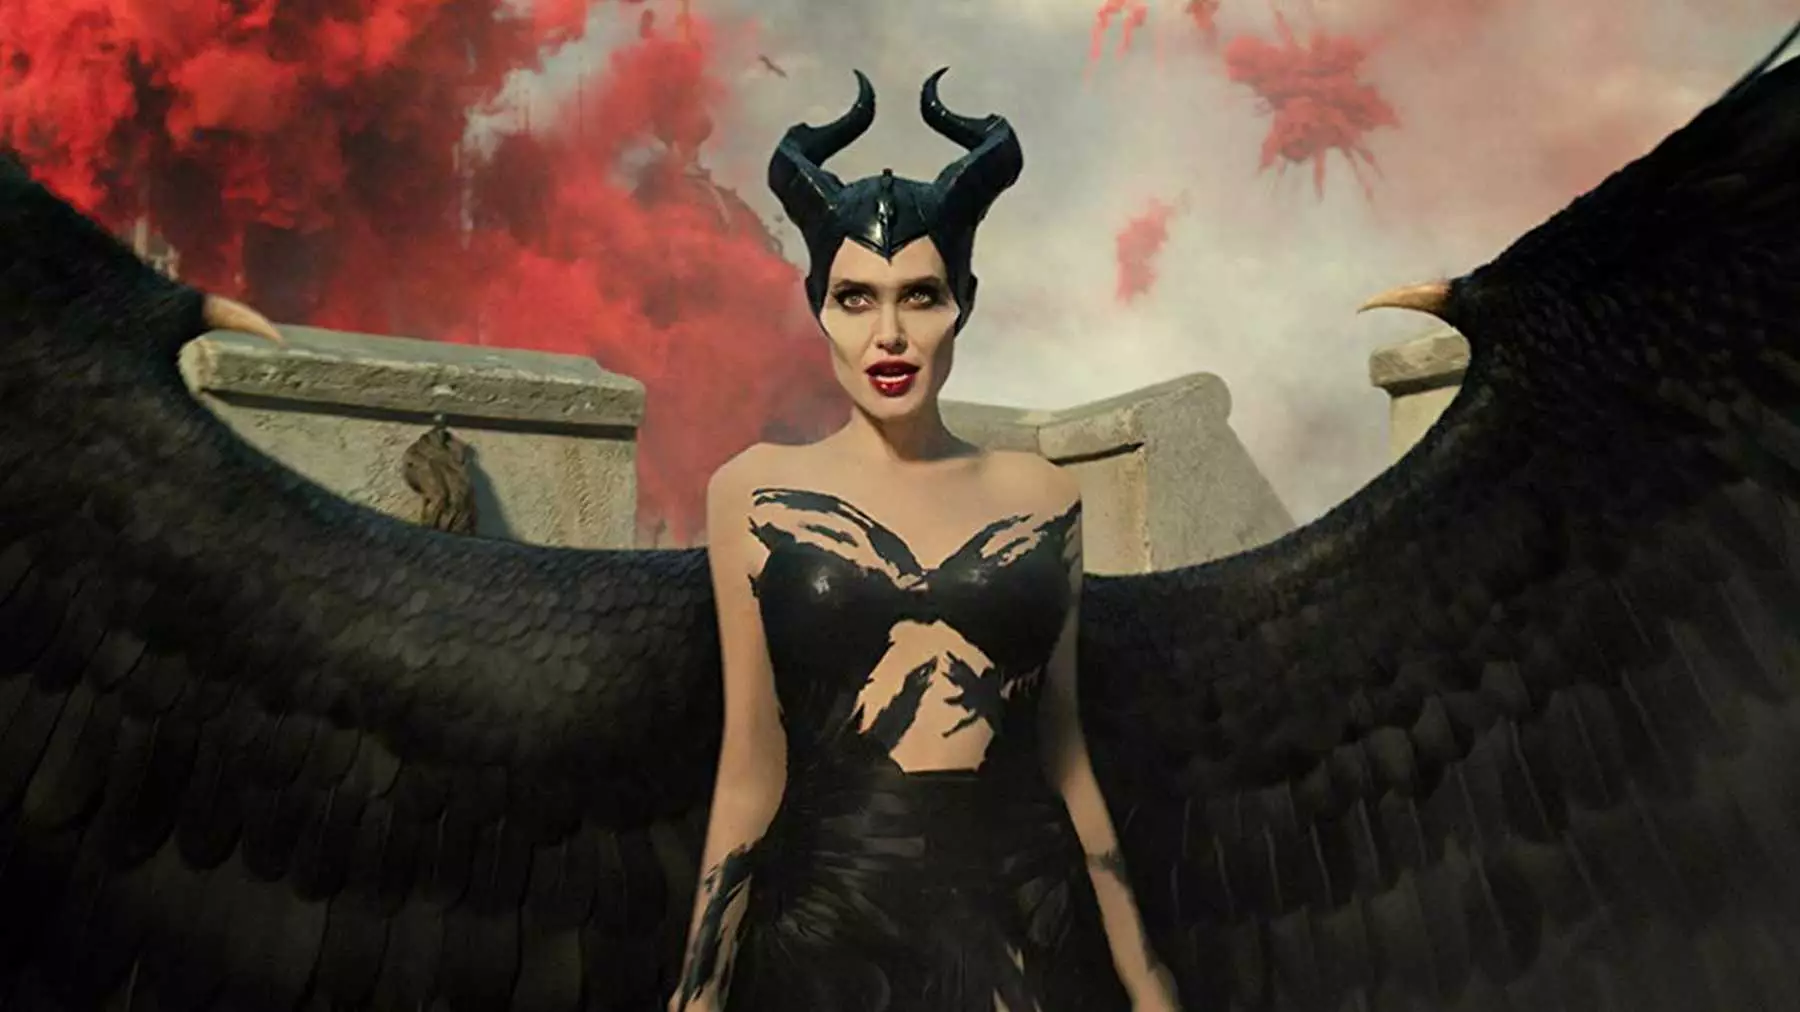 Angelina is back as everyone's favourite Disney villain Maleficent (